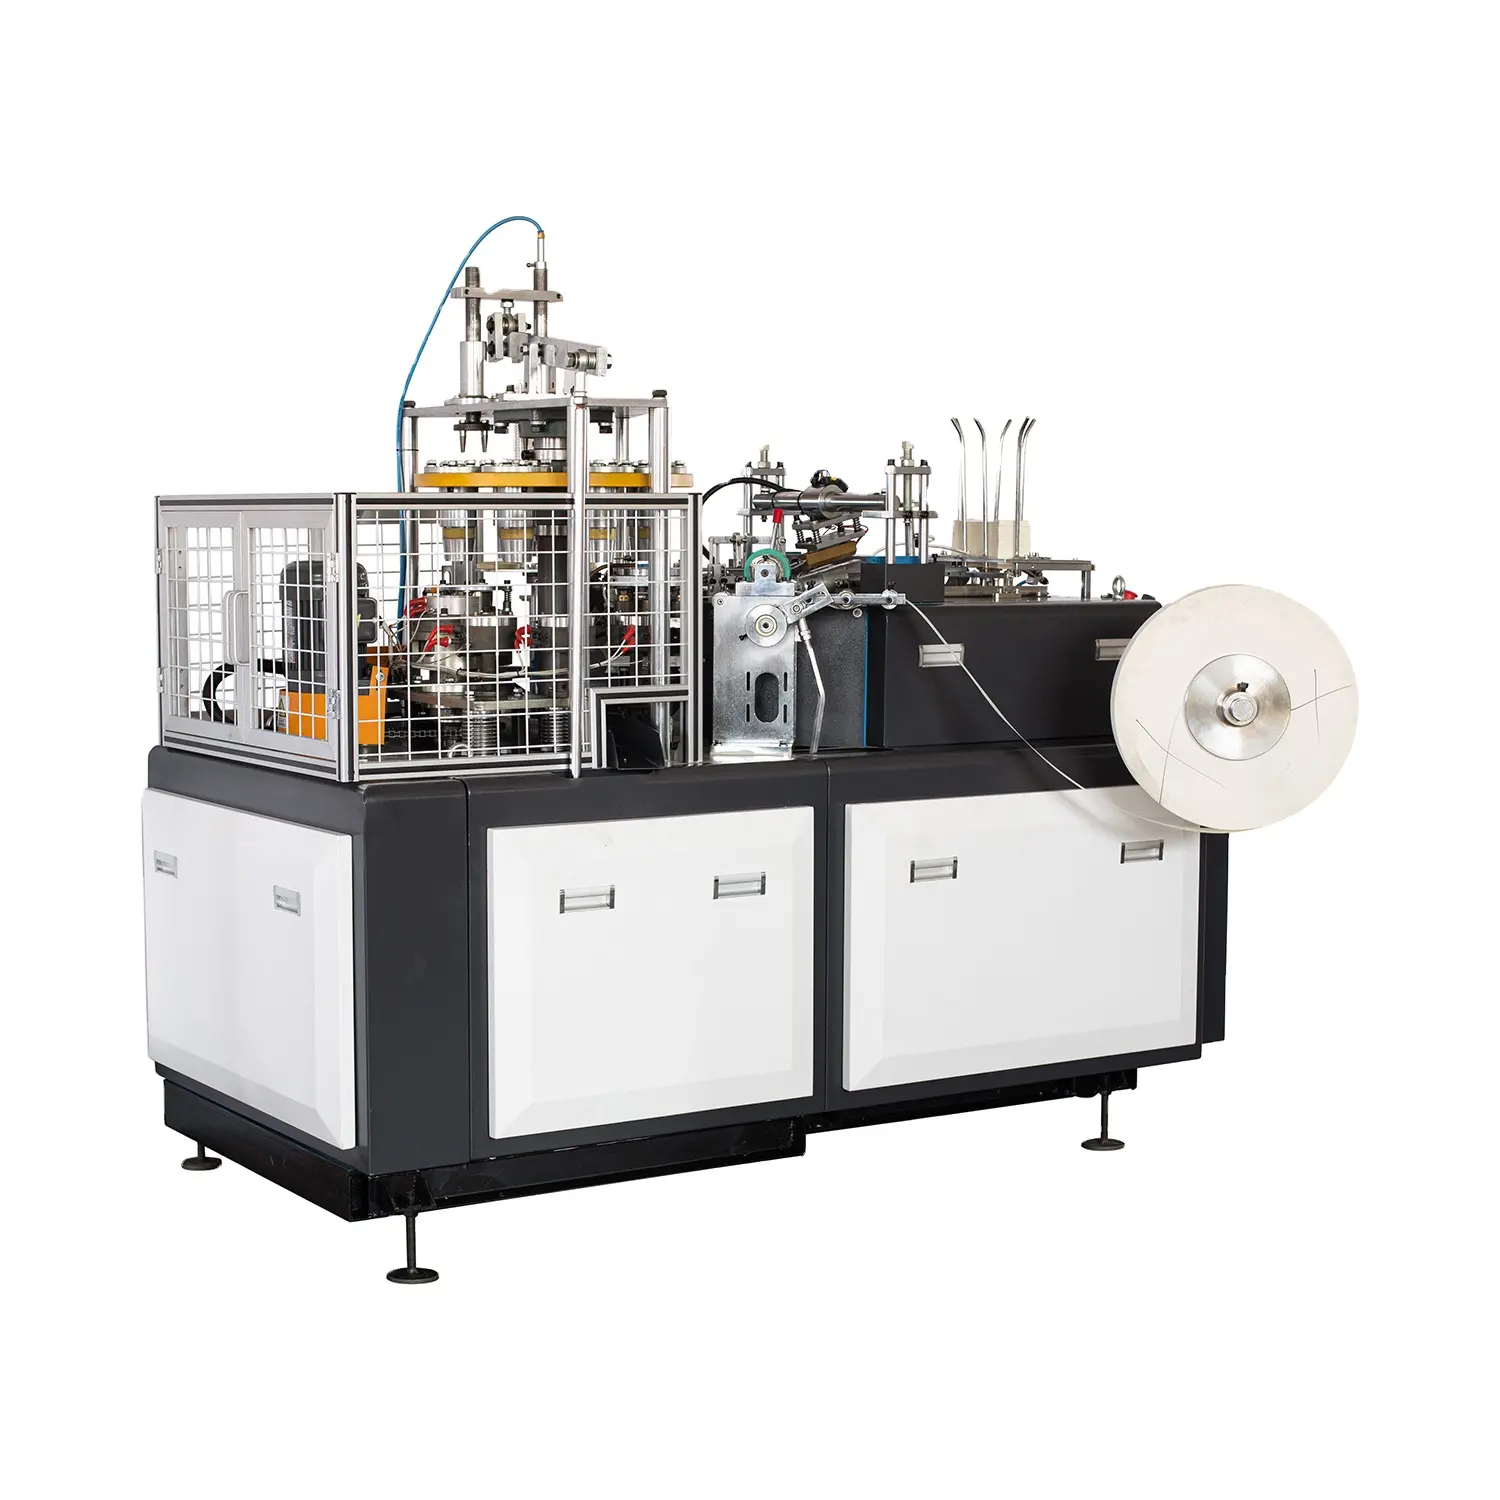 XINLEI BRAND fully automatic disposable small business idea XL-ZB09 paper coffee carton cup making forming machine ultrasonic